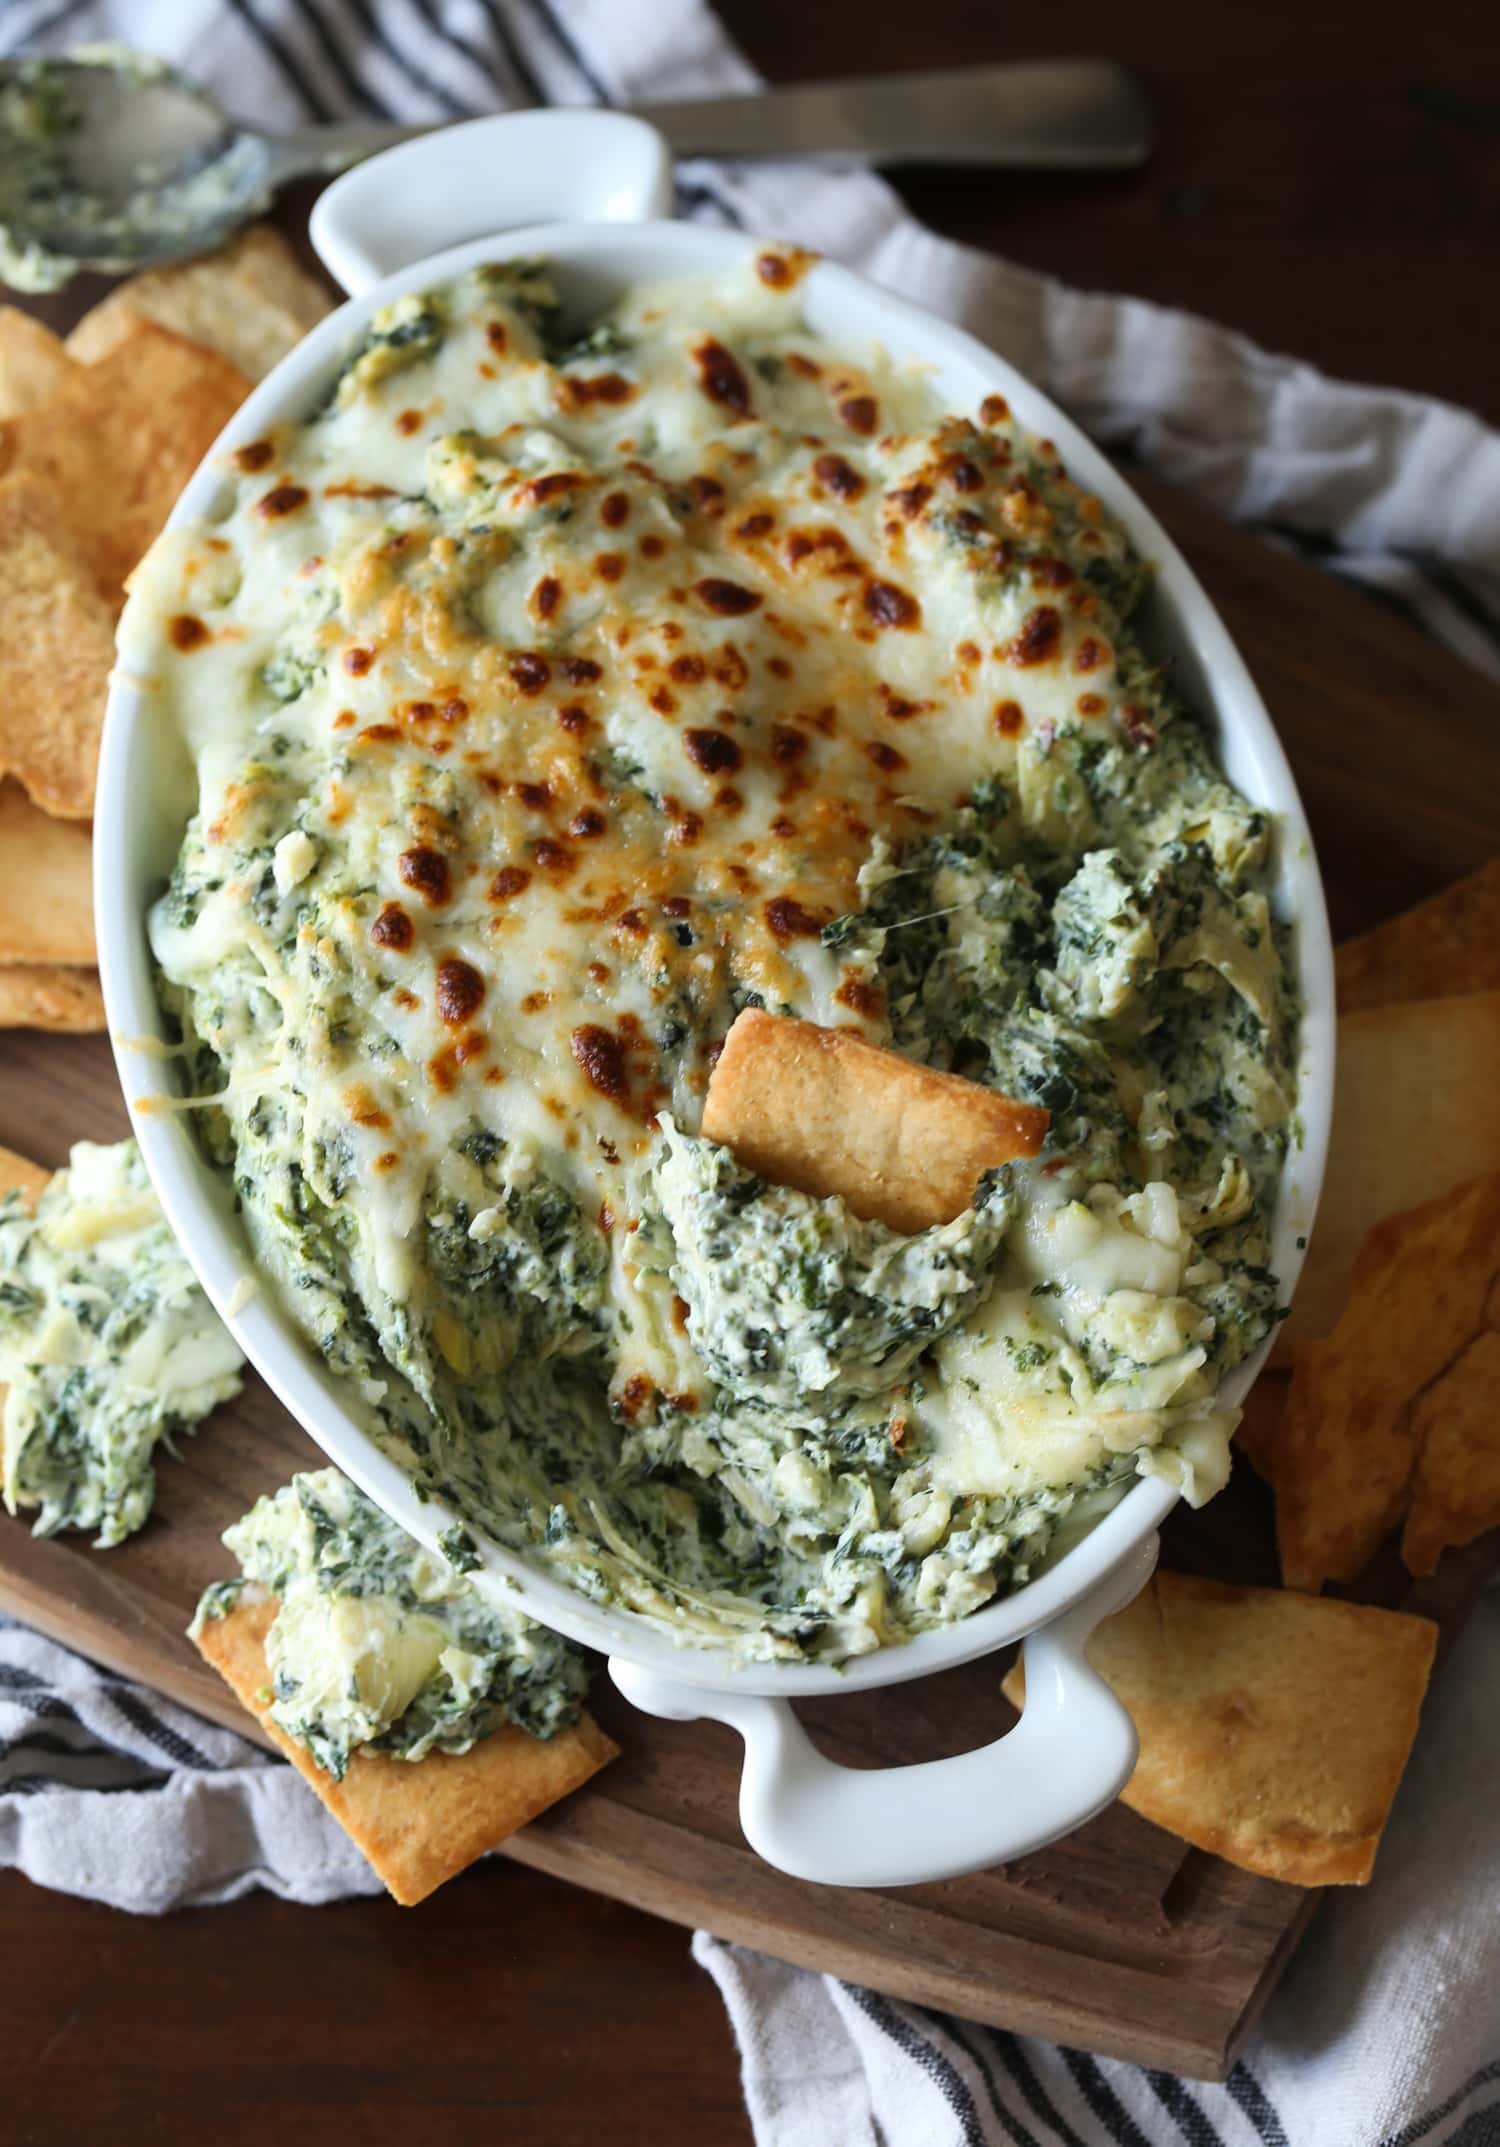 A pita chip stuck in the center of creamy spinach and artichoke dip.